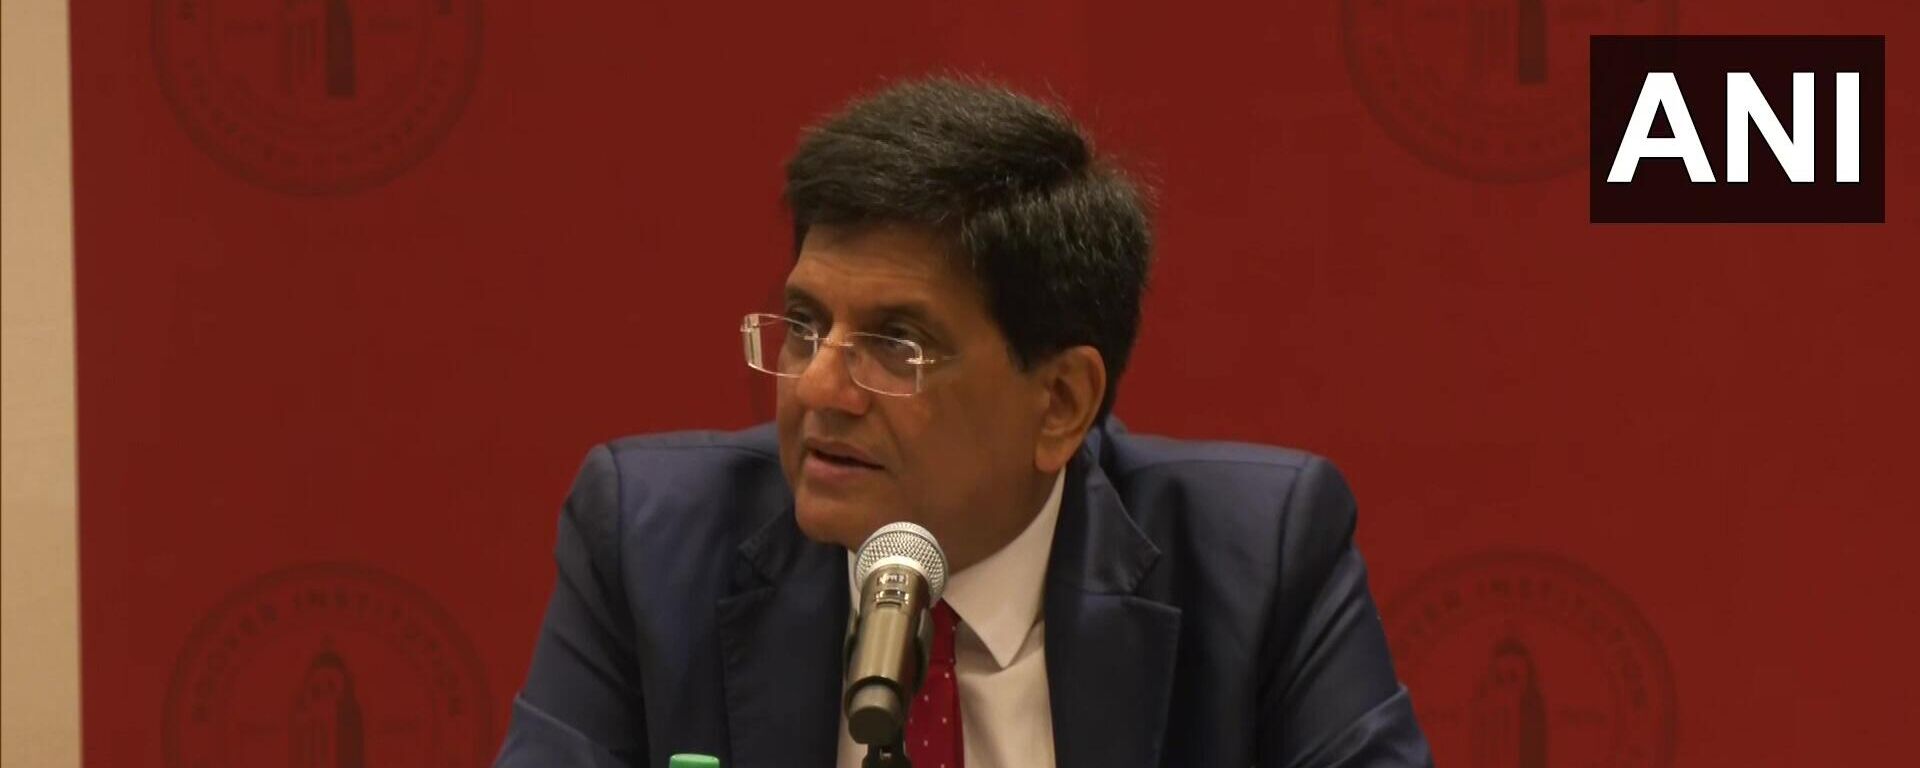 Due to structured education, there is a belief in the management principle that the knowledge coming from textbooks is different from the ground realities: Union Minister Piyush Goyal at Stanford University in California - Sputnik International, 1920, 07.09.2022